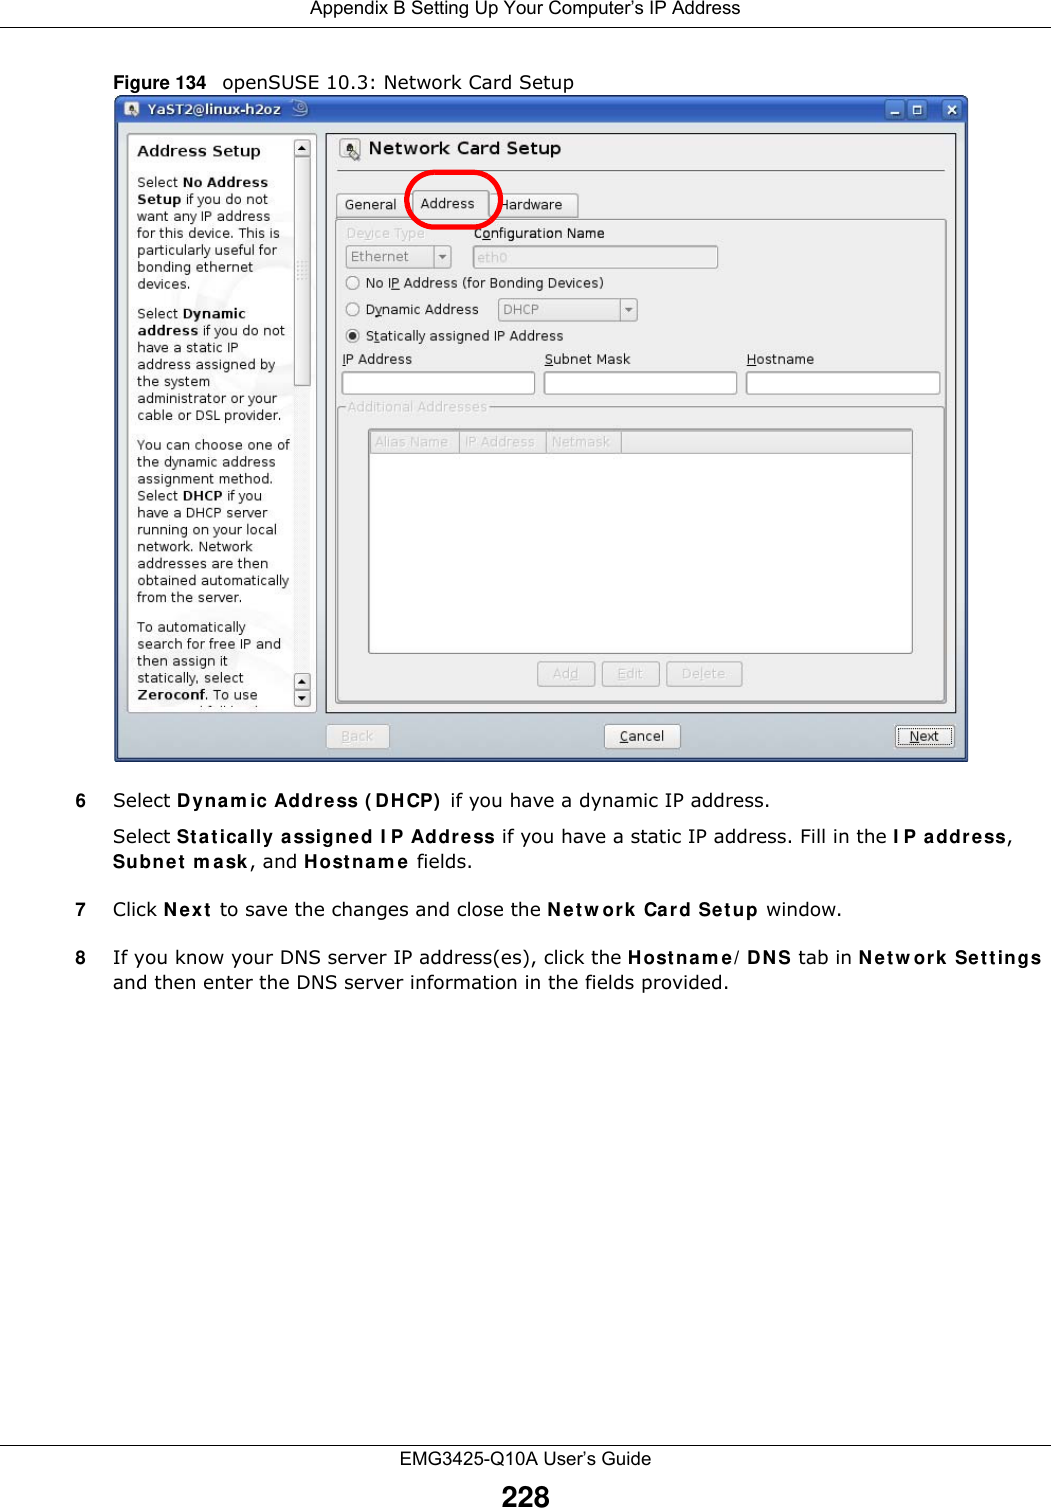 Appendix B Setting Up Your Computer’s IP AddressEMG3425-Q10A User’s Guide228Figure 134   openSUSE 10.3: Network Card Setup6Select Dynam ic Addre ss ( DHCP)  if you have a dynamic IP address.Select St a t ically a ssigned I P Addr ess if you have a static IP address. Fill in the I P a ddr ess, Subnet  m ask , and Host na m e  fields.7Click N e x t  to save the changes and close the N et w ork Card Se t up window. 8If you know your DNS server IP address(es), click the H ost n a m e / D N S tab in N e tw or k Se t t ings and then enter the DNS server information in the fields provided.